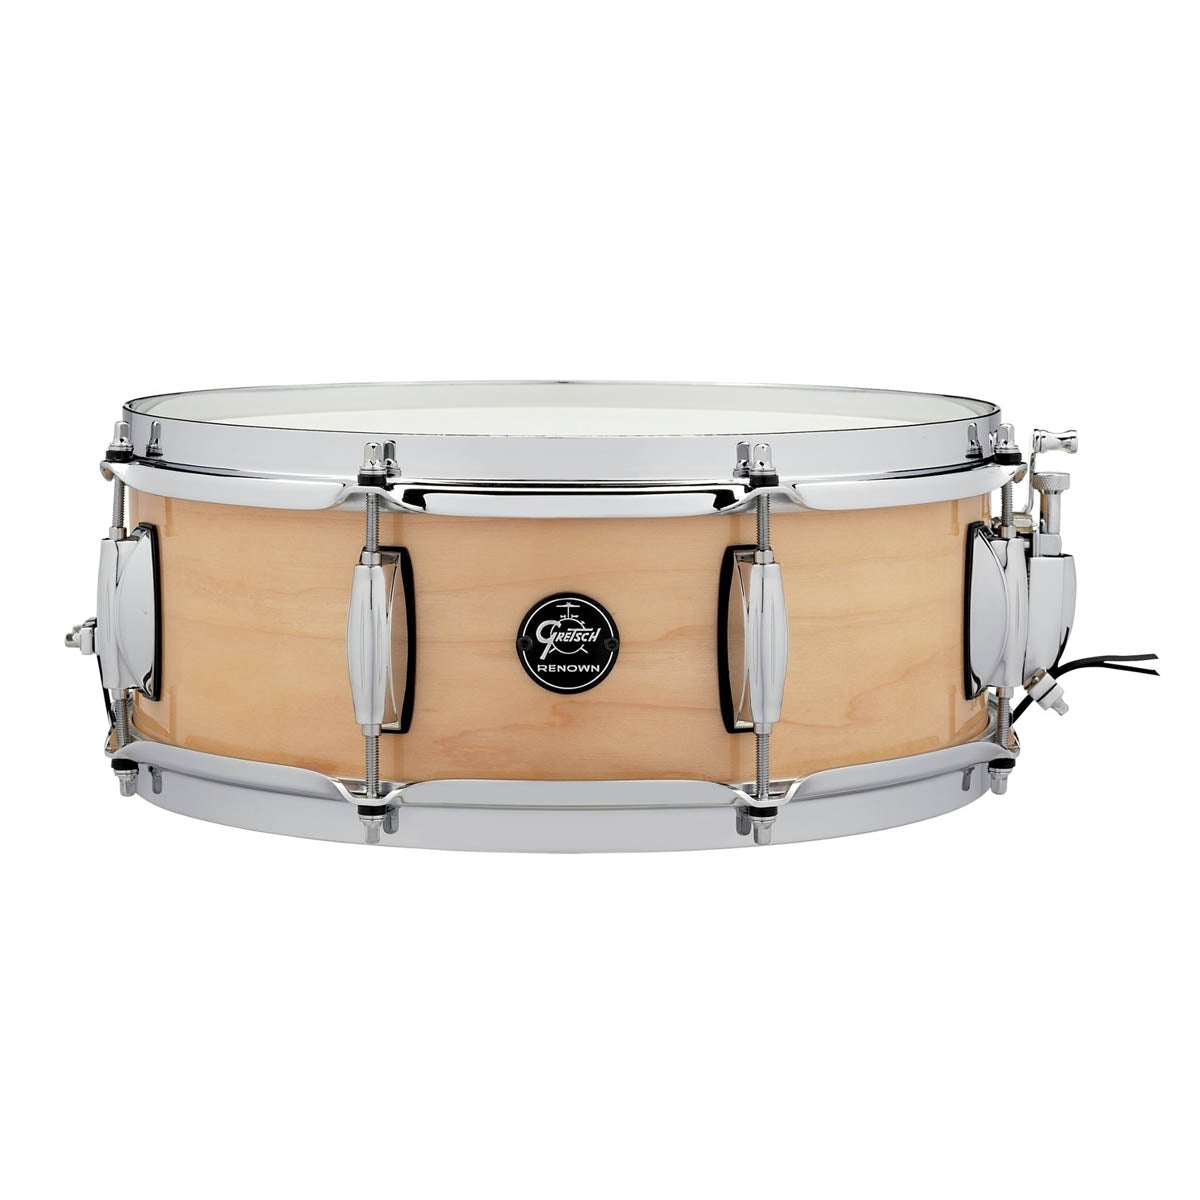 Gretsch Renown Maple 14"x5" Snare Drum in Gloss Natural